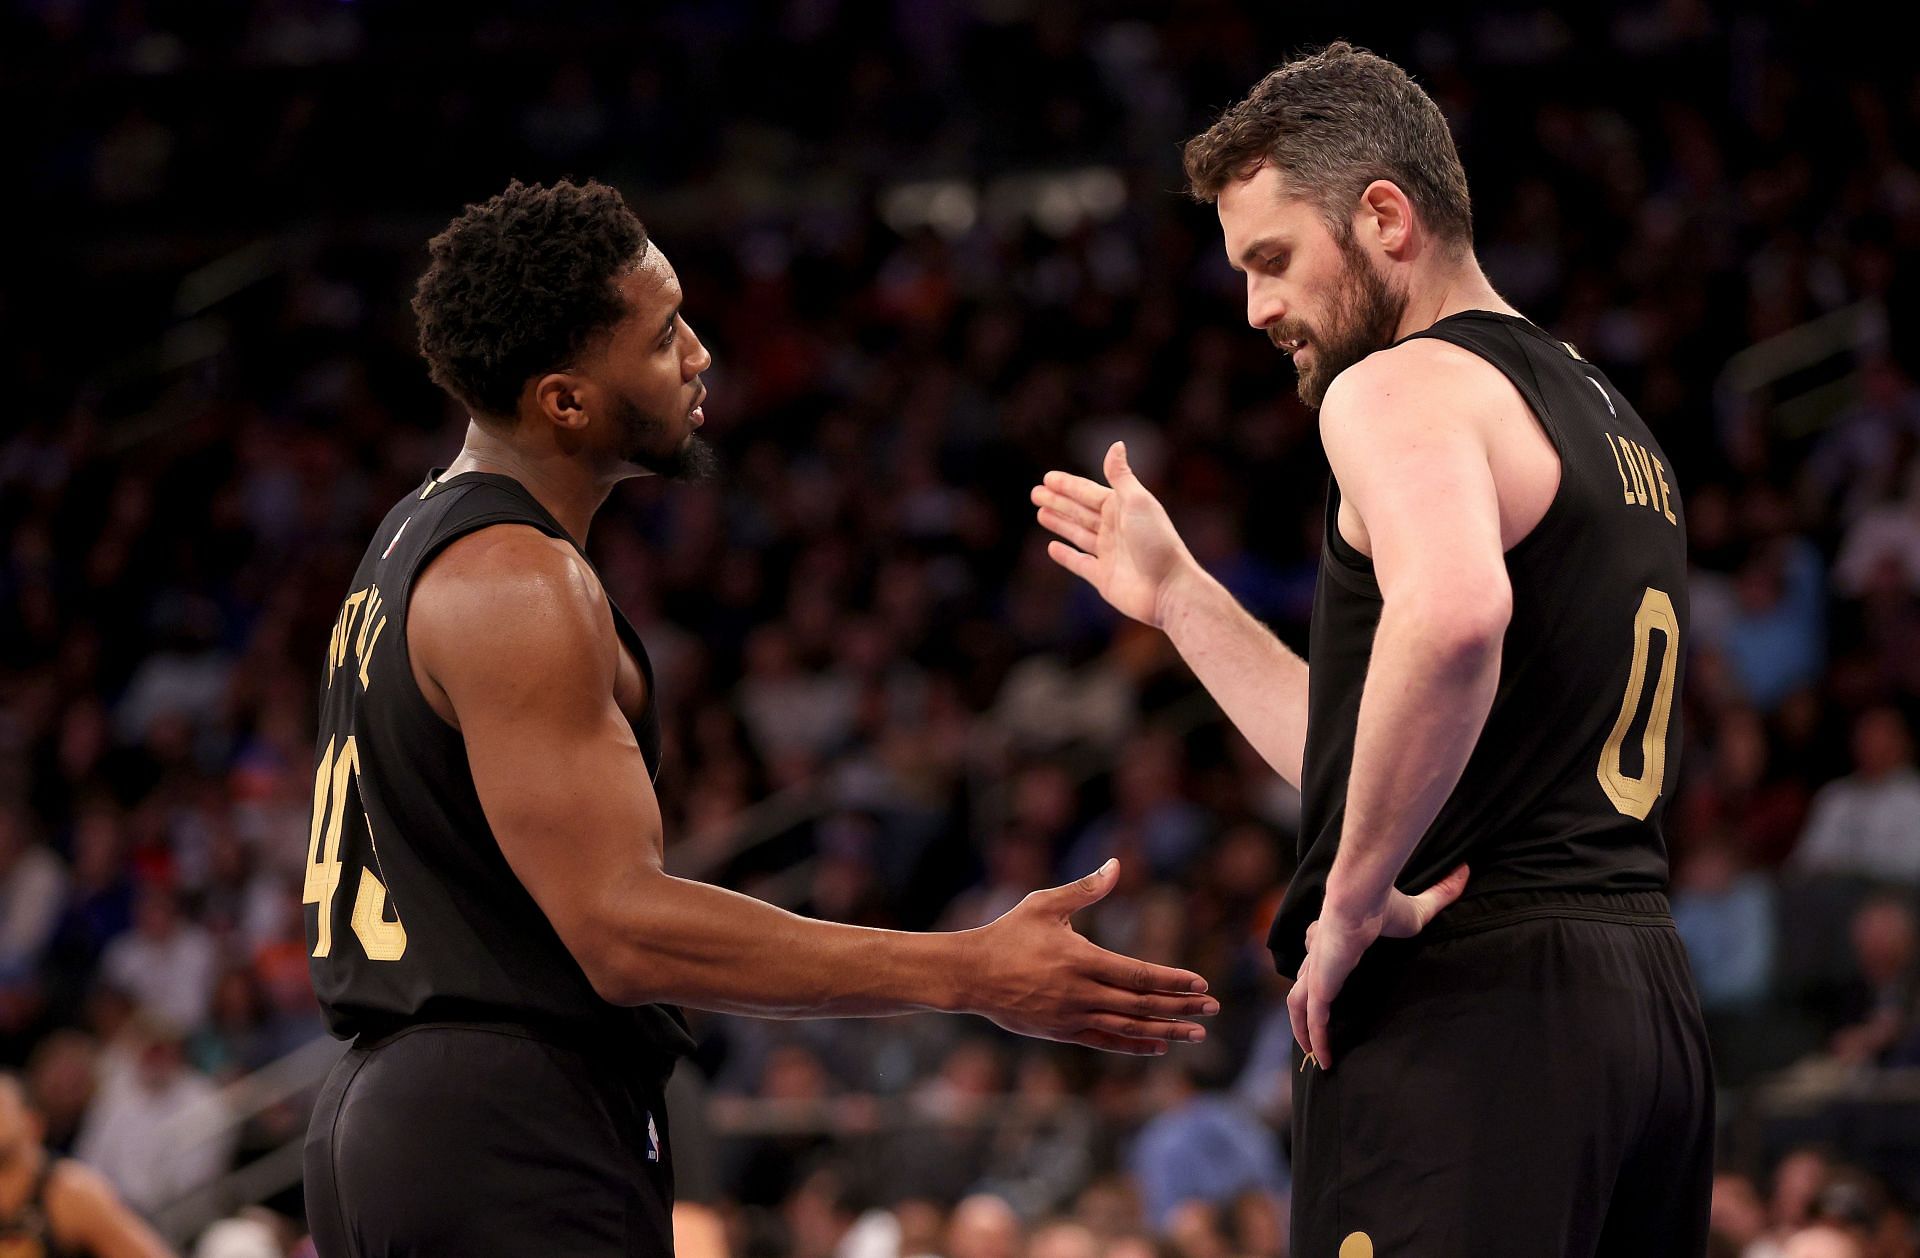 Kevin Love leaving Cleveland, possibly heading to Miami - Eurohoops